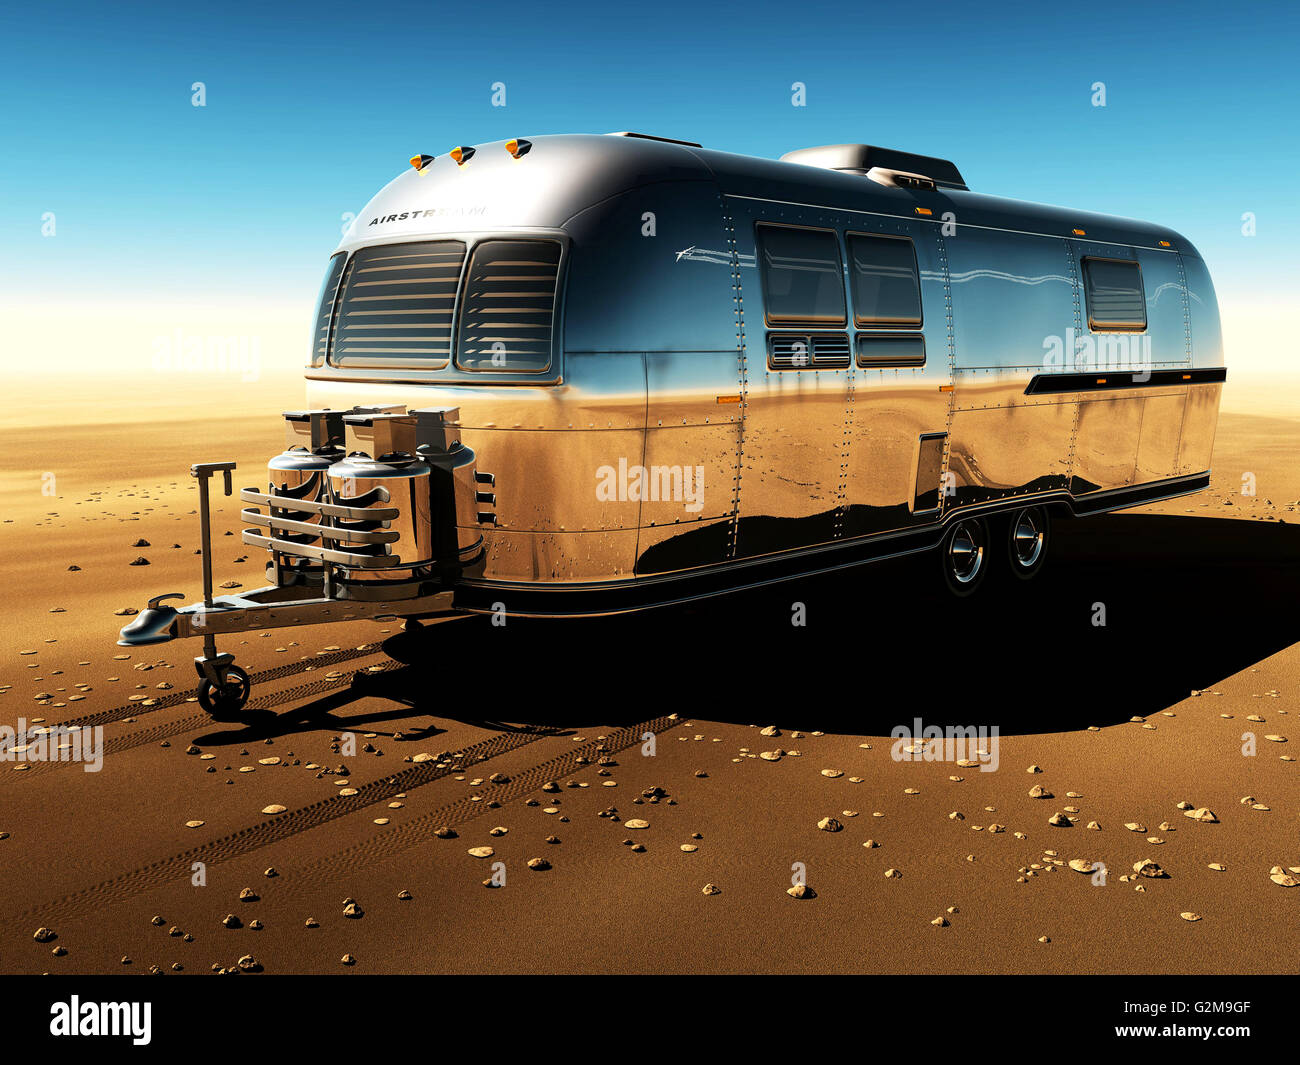 Metal trailer on desert, clear sky, digitally generated image Stock Photo